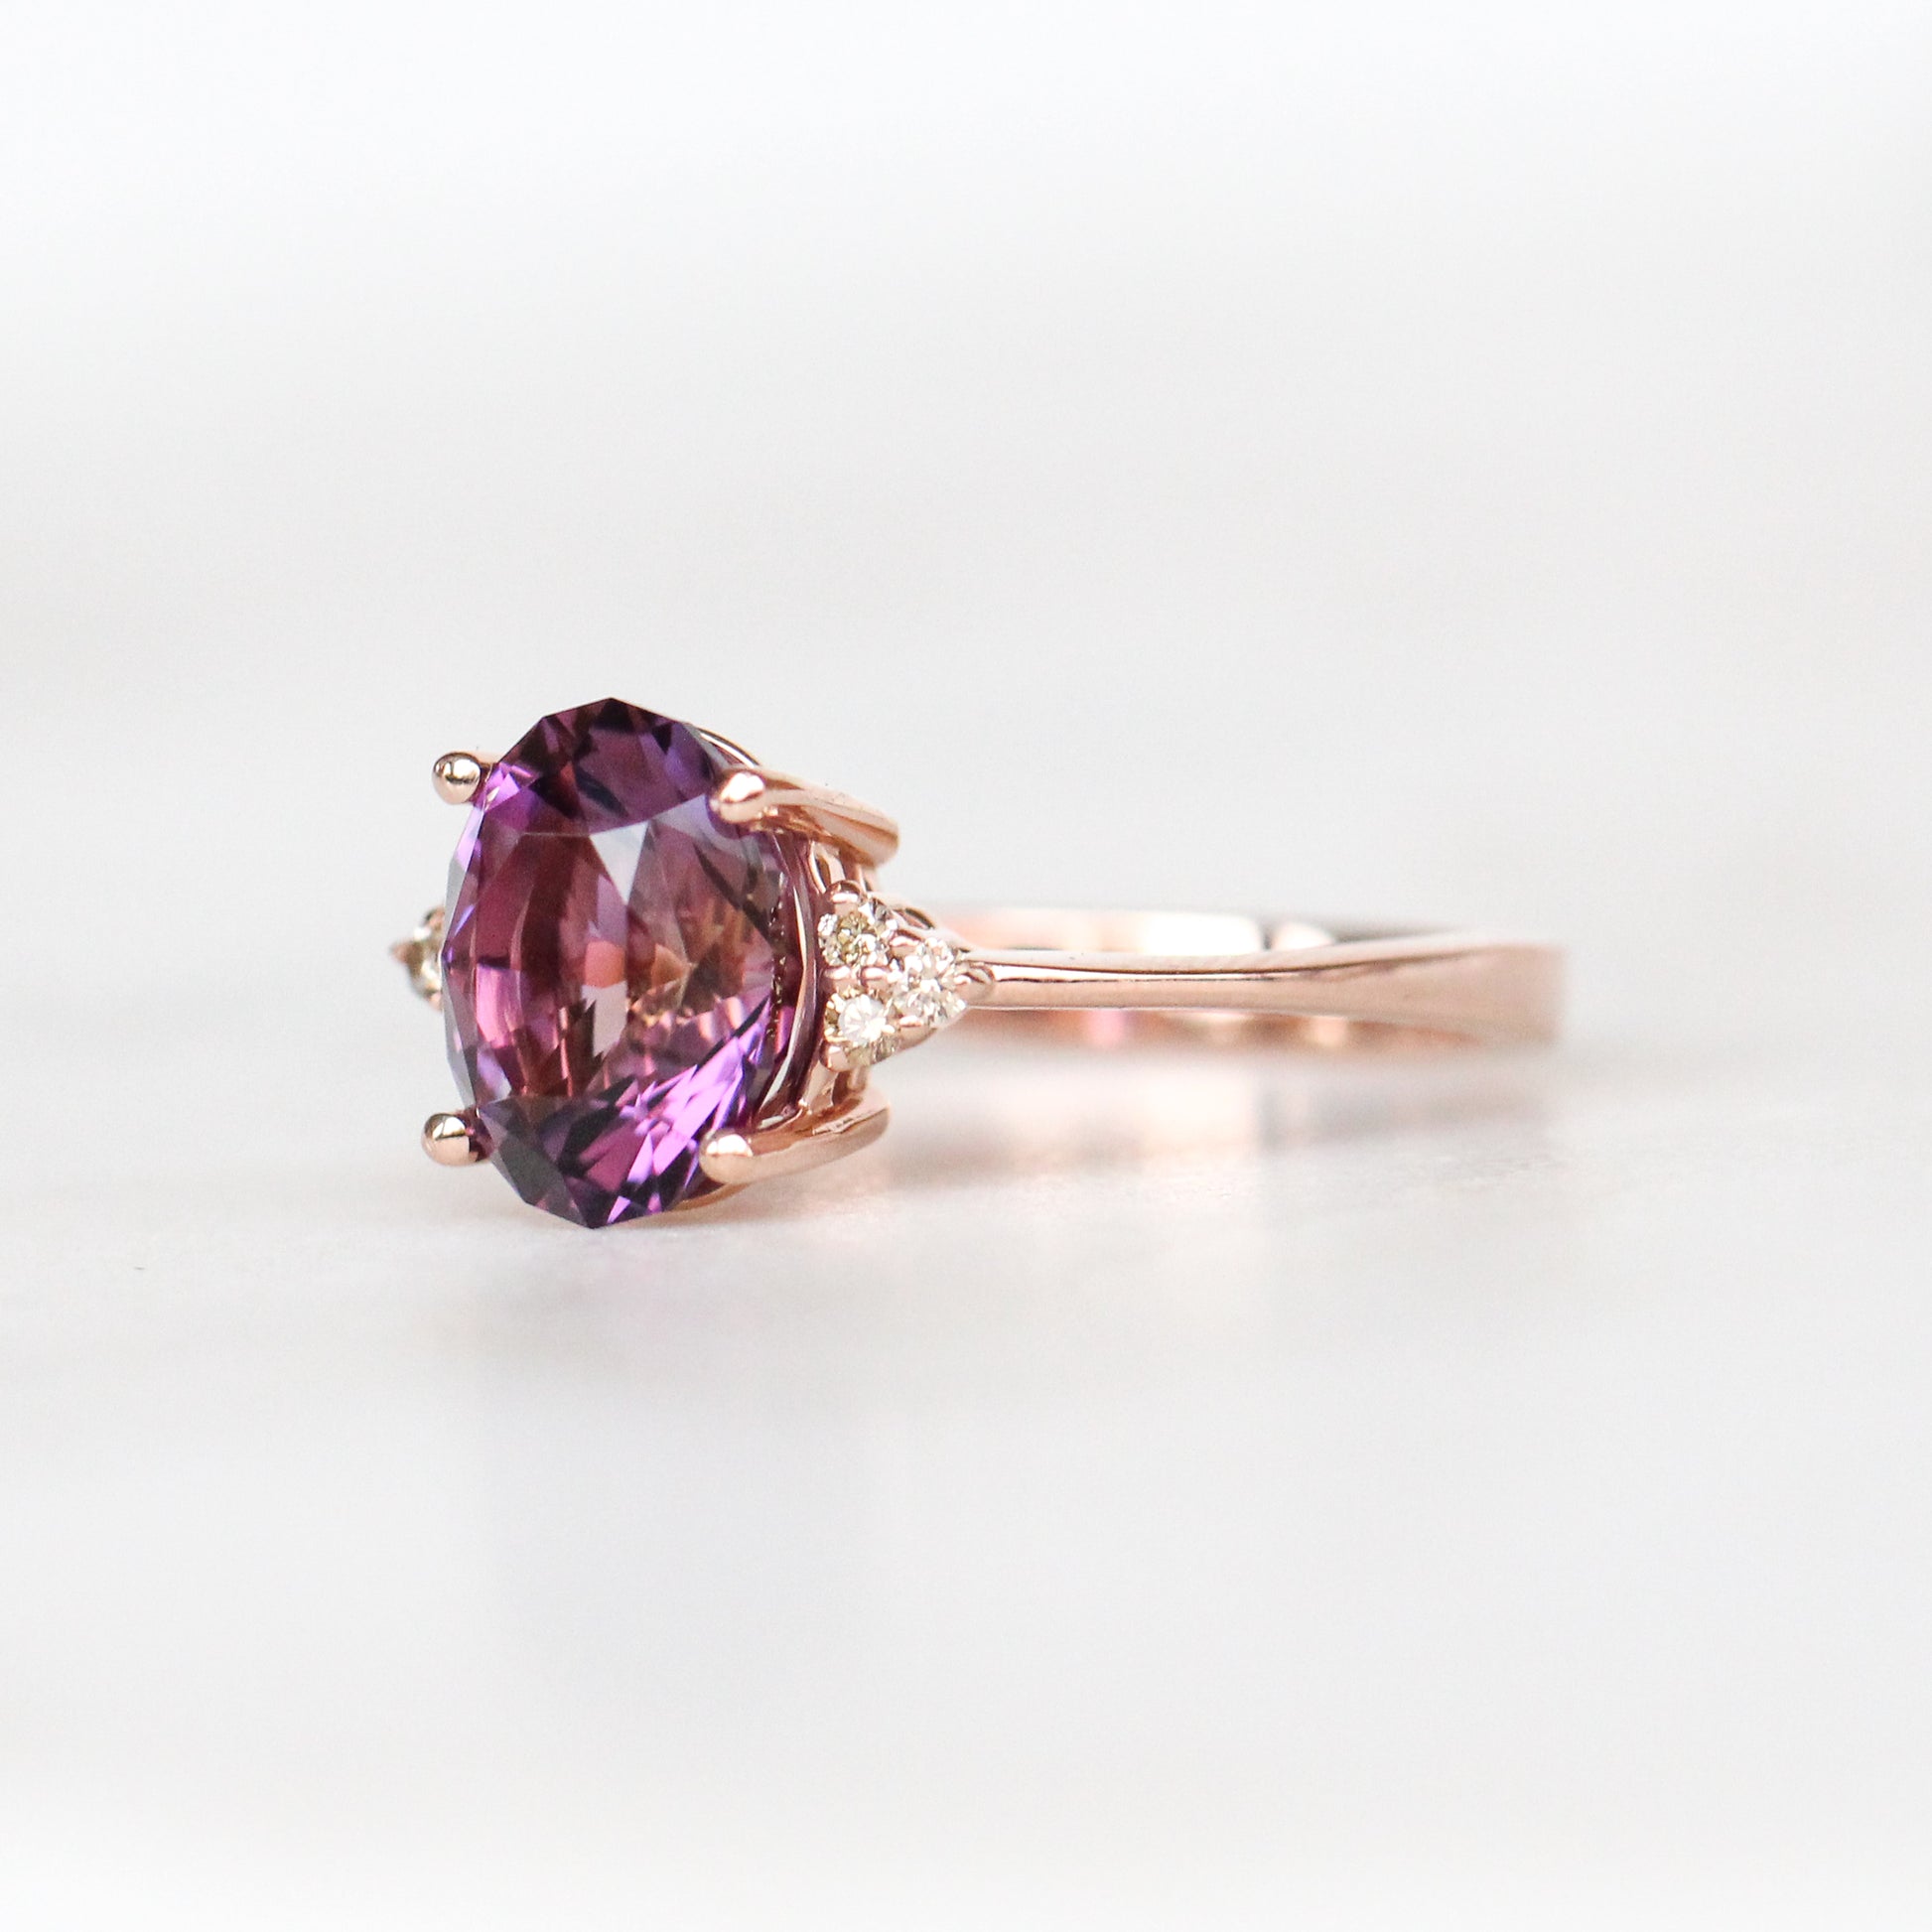 Imogene Ring with 2.31 Carat Amethyst and White Accent Diamonds in 14k Rose Gold - Ready to Size and Ship - Midwinter Co. Alternative Bridal Rings and Modern Fine Jewelry